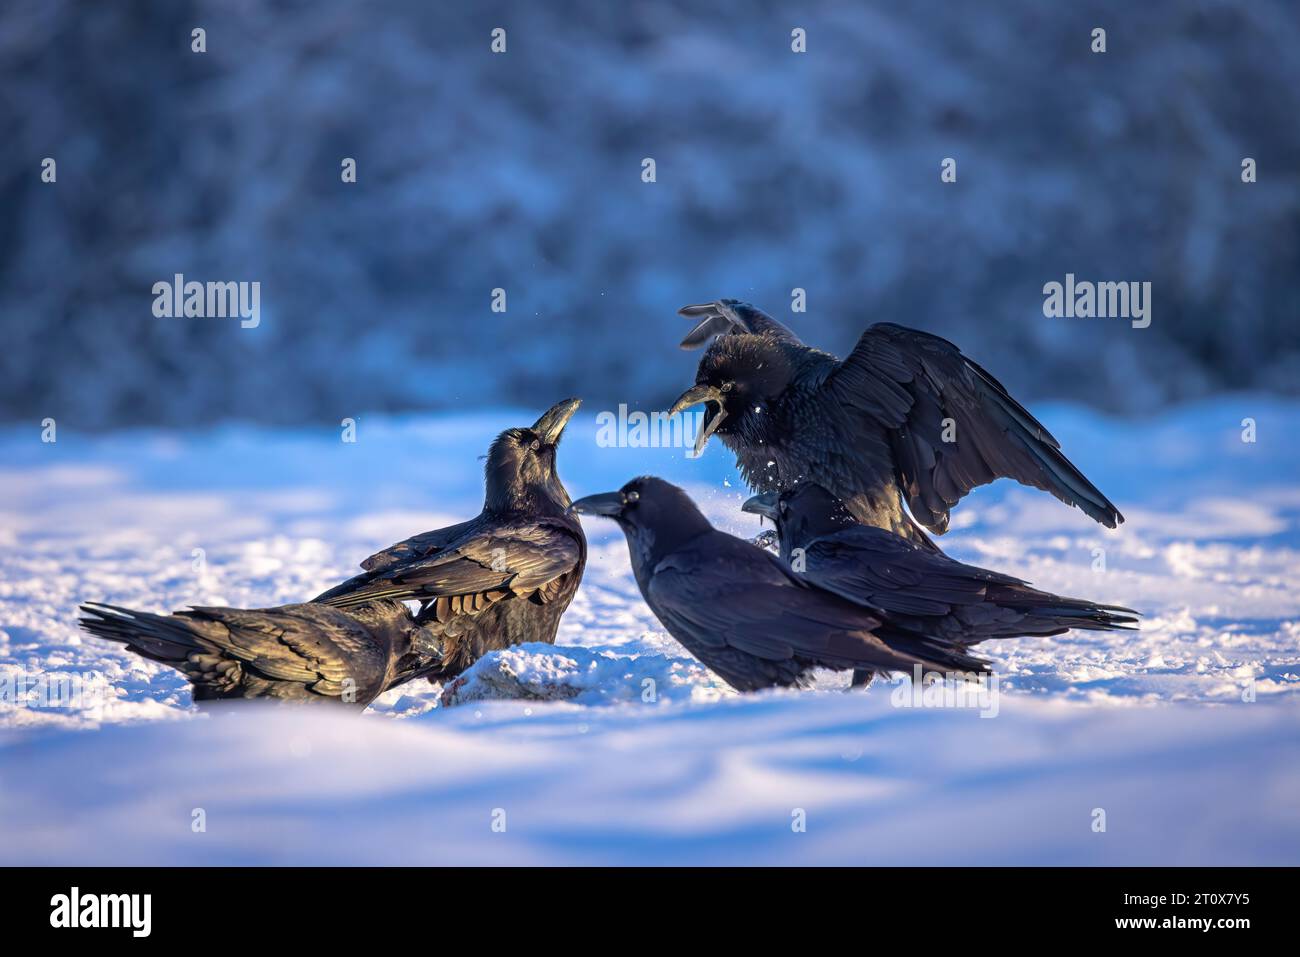 Black raven bird (Corvus corax) with open wings and snow flakes bokeh, wildlife in nature Stock Photo